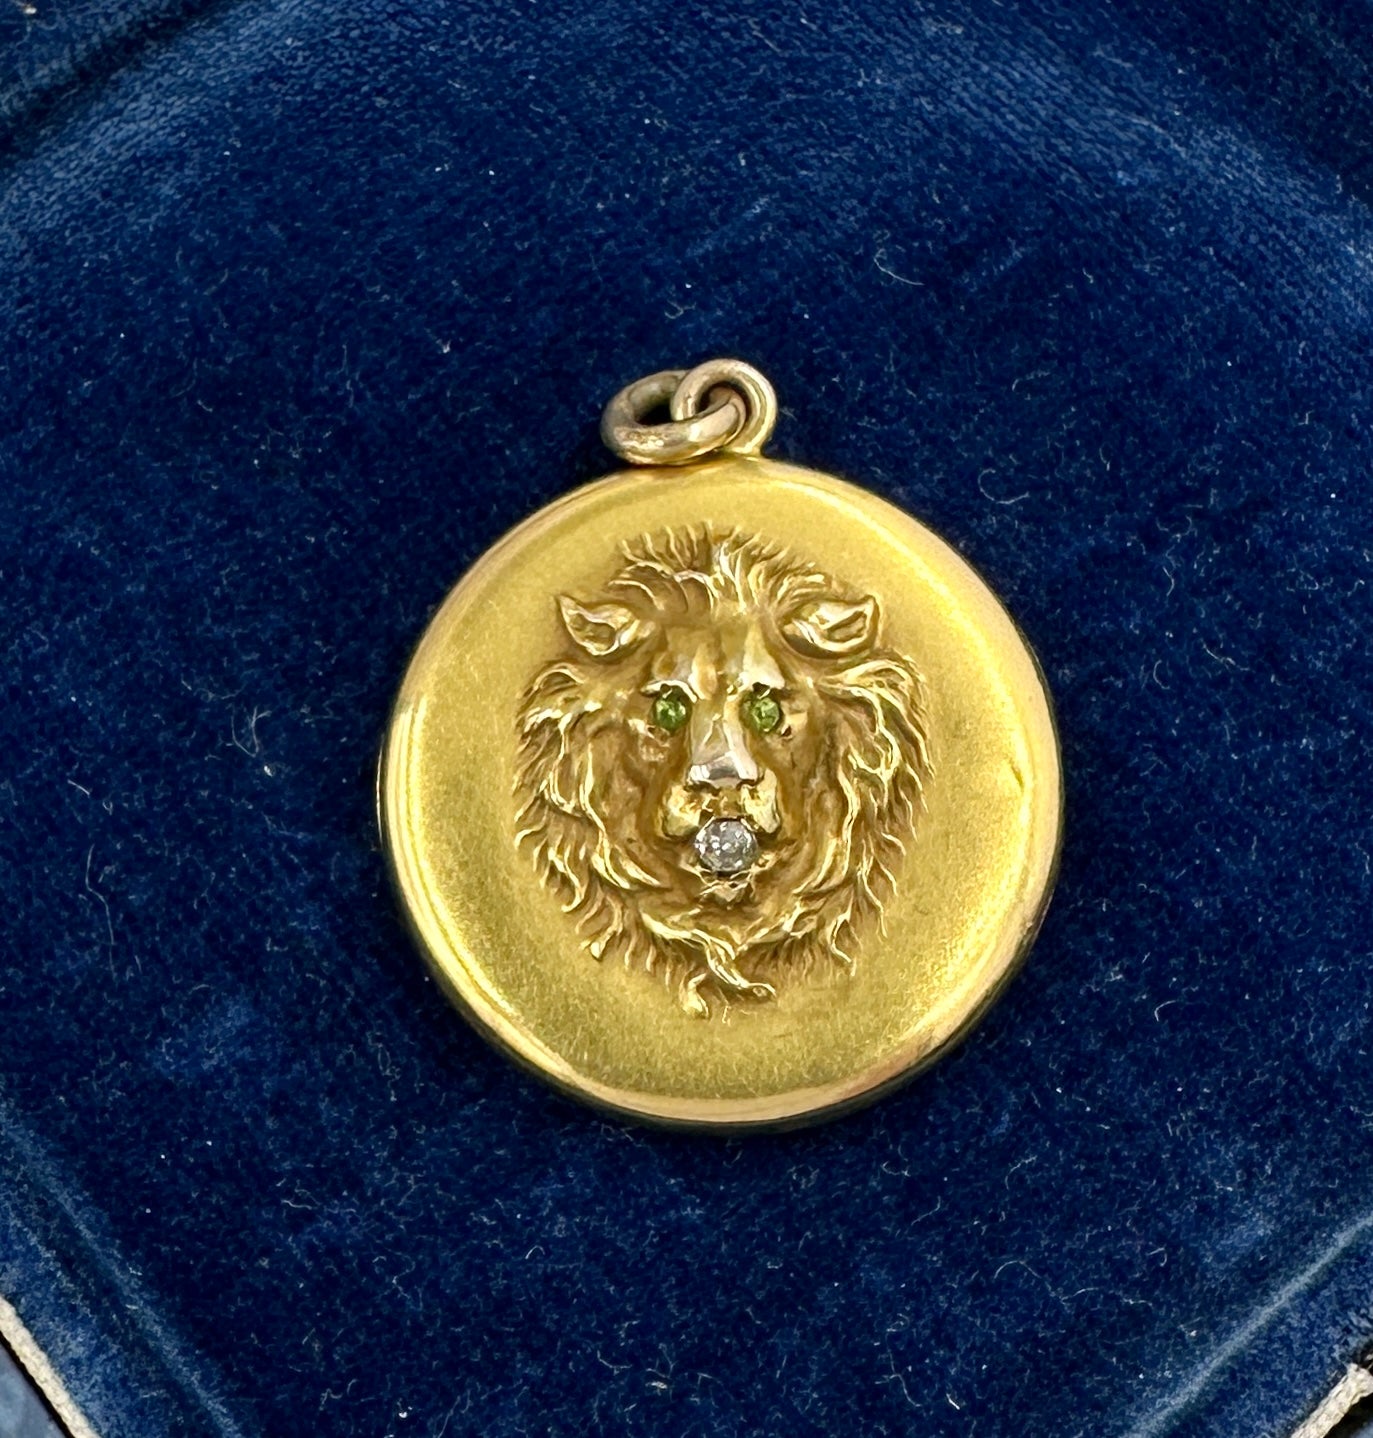 This is a spectacular antique Victorian Lion Locket in 10 Karat Gold with an Old Mine Cut Diamond in the mouth and two sparkling green Peridot gems in the eyes, in an extraordinary three-dimensional design.  The locket is one of the most beautiful